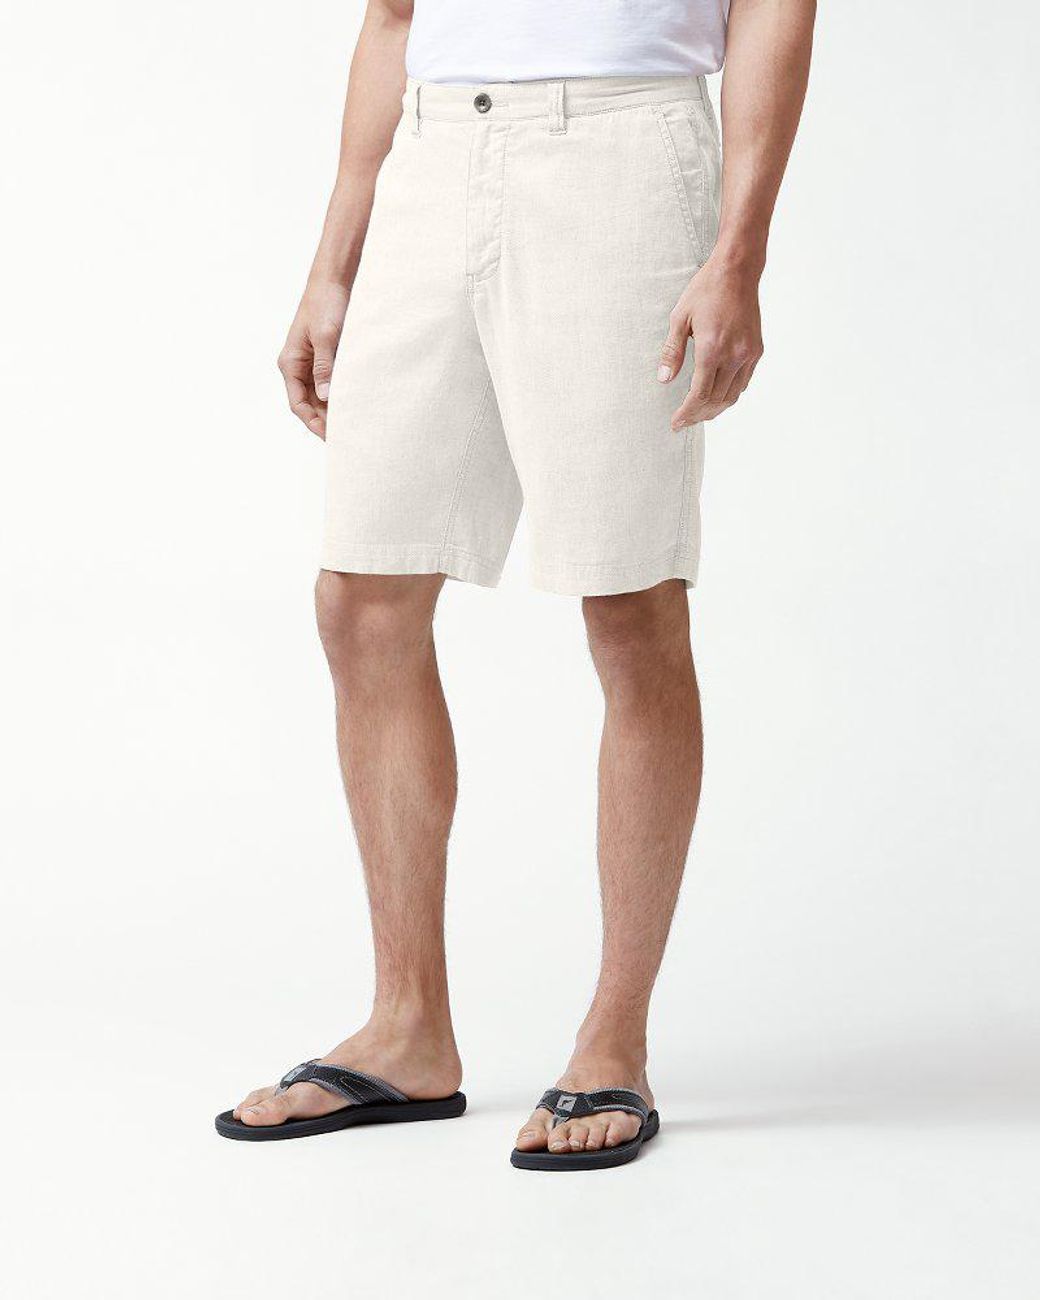 Tommy Bahama Beach Linen 10-inch Shorts in Natural for Men - Lyst